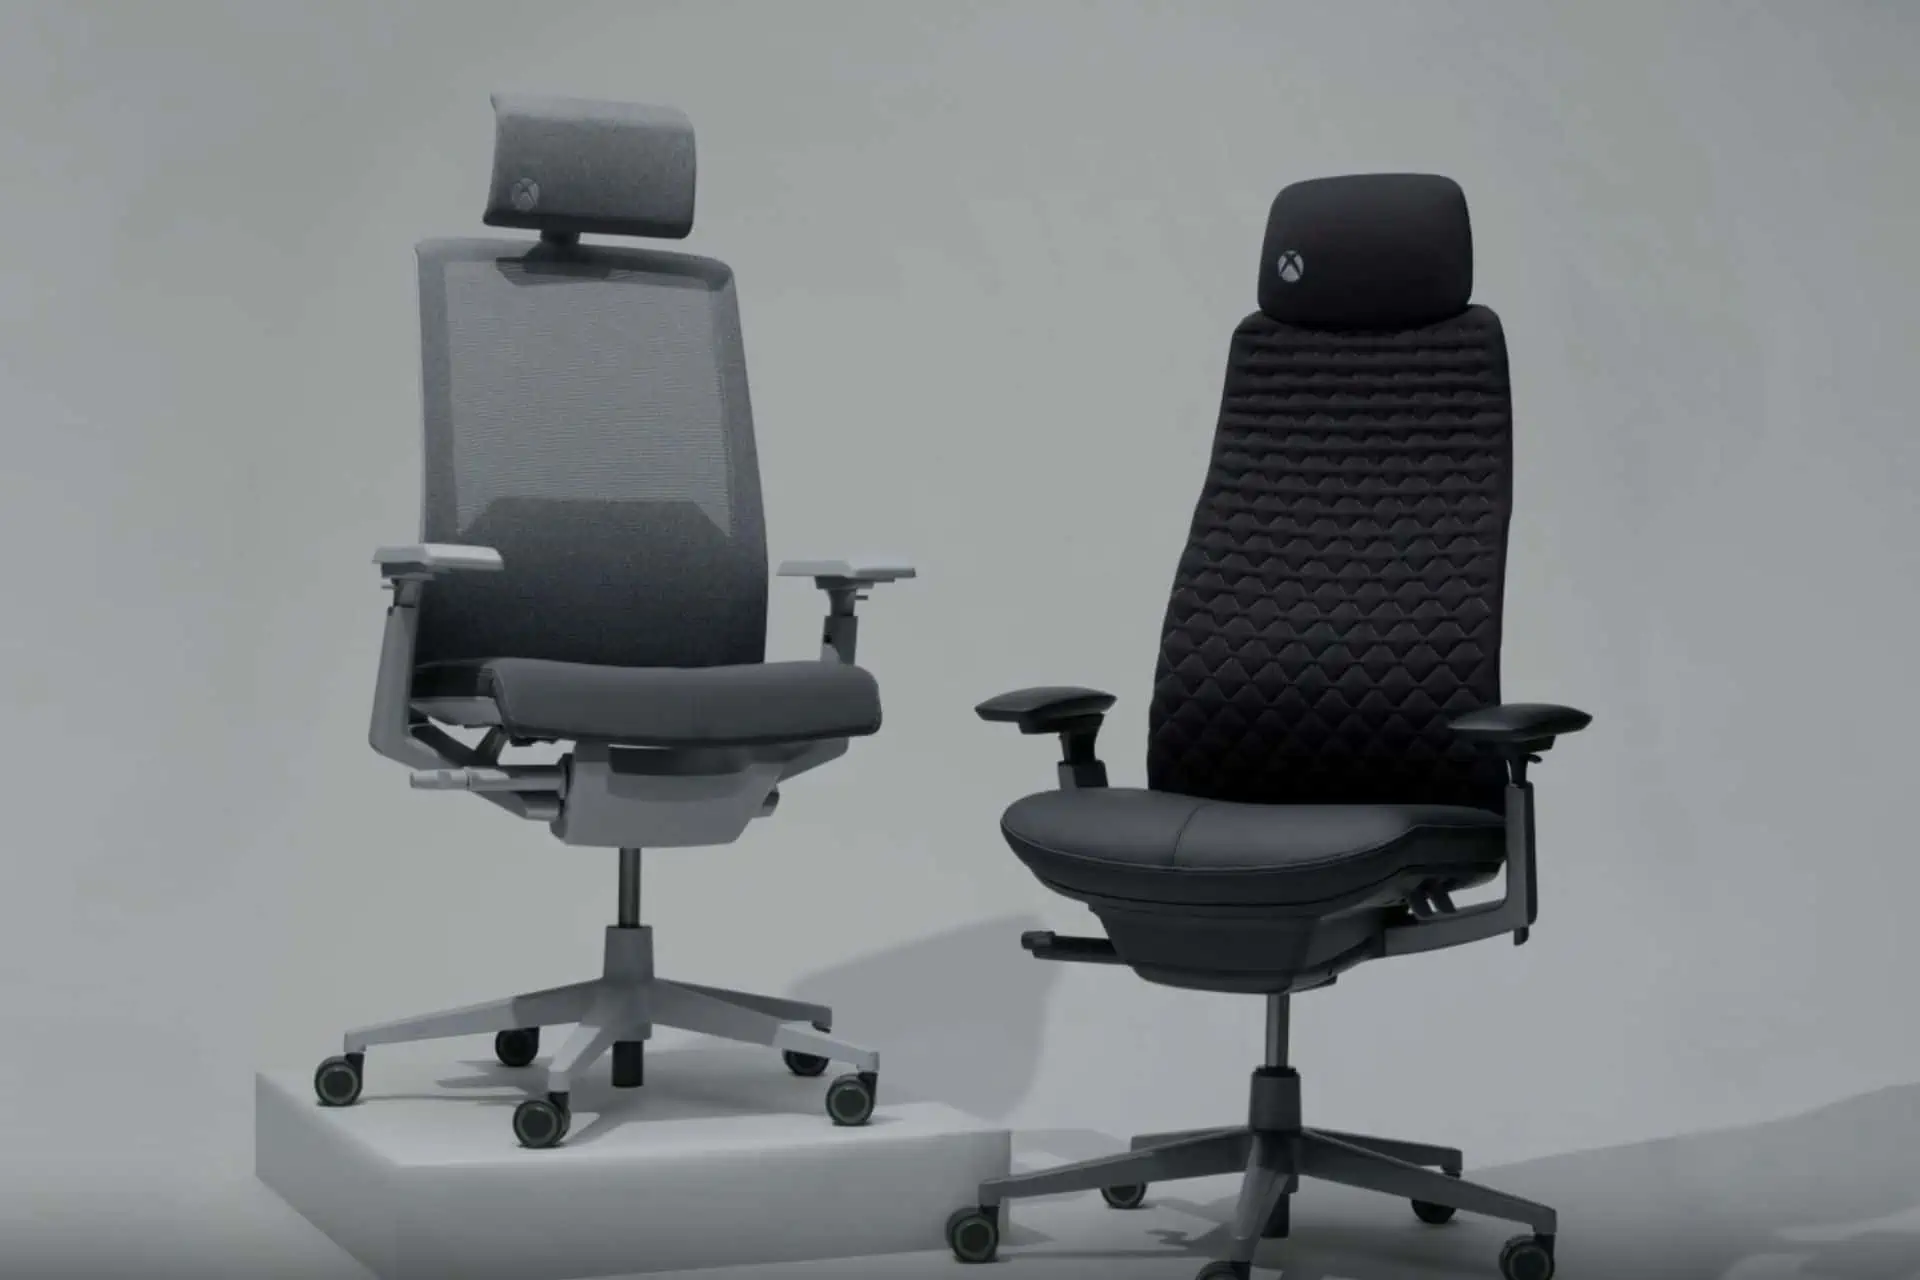 The Haworth Xbox gaming chair comes in 2 versions and it will let